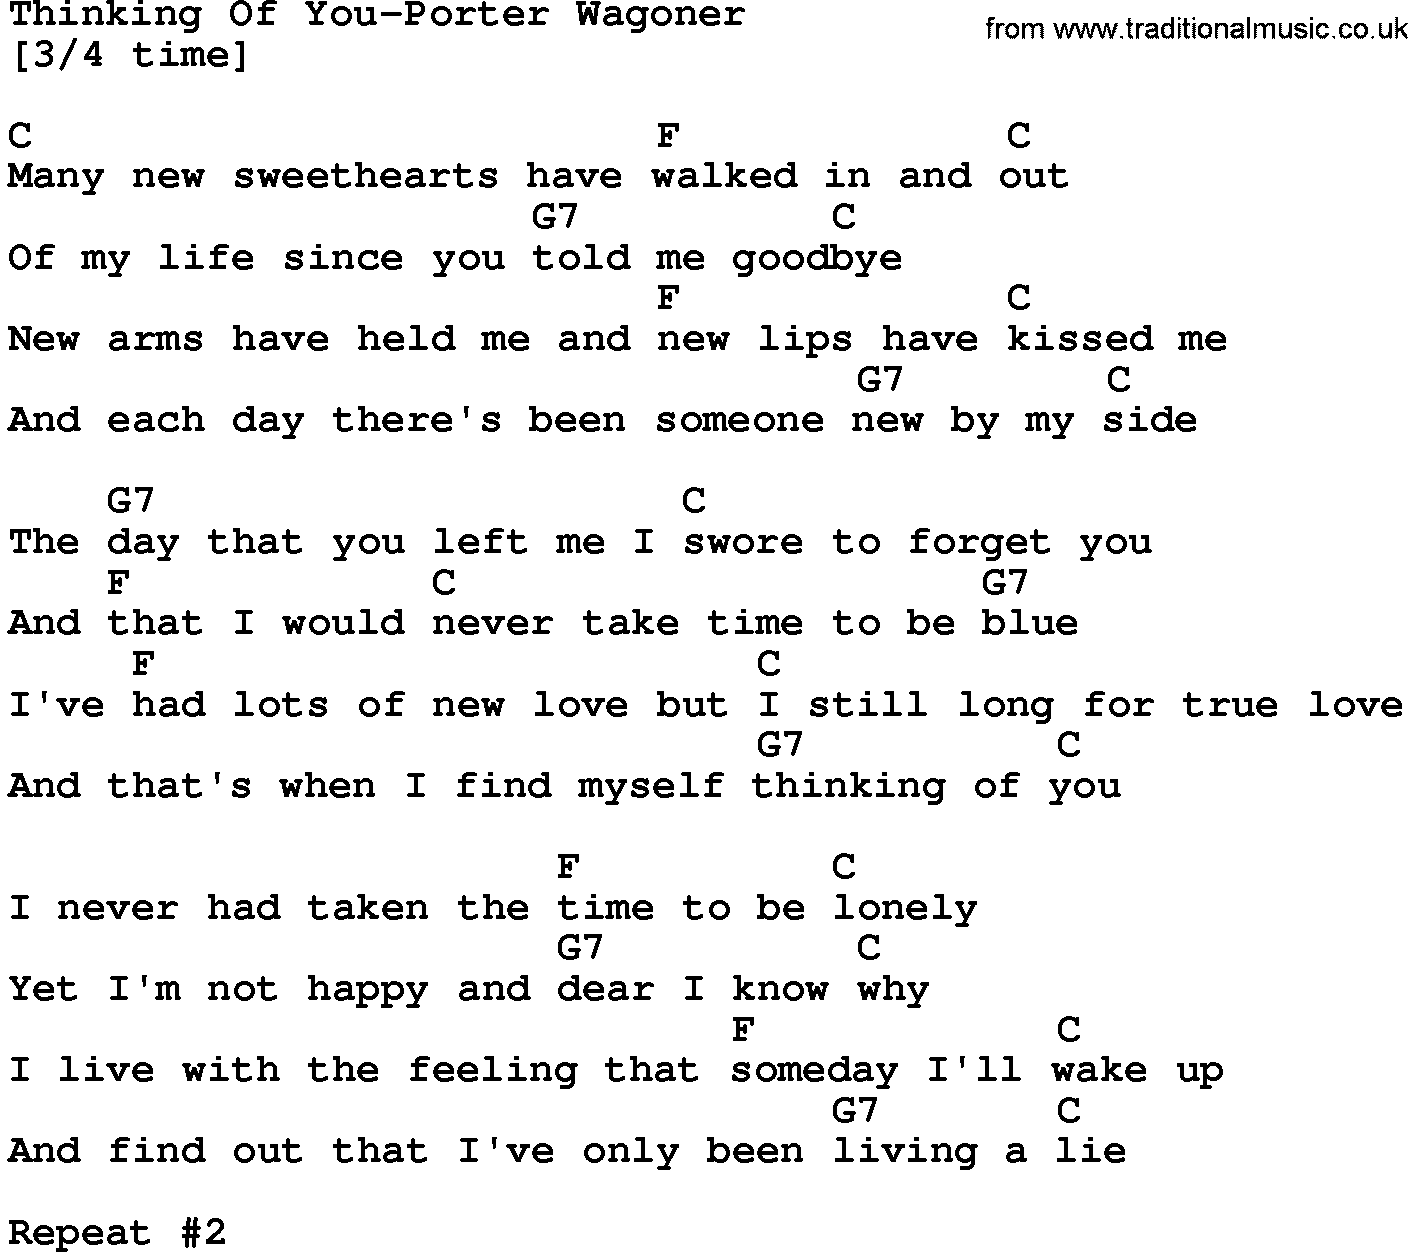 Country music song: Thinking Of You-Porter Wagoner lyrics and chords